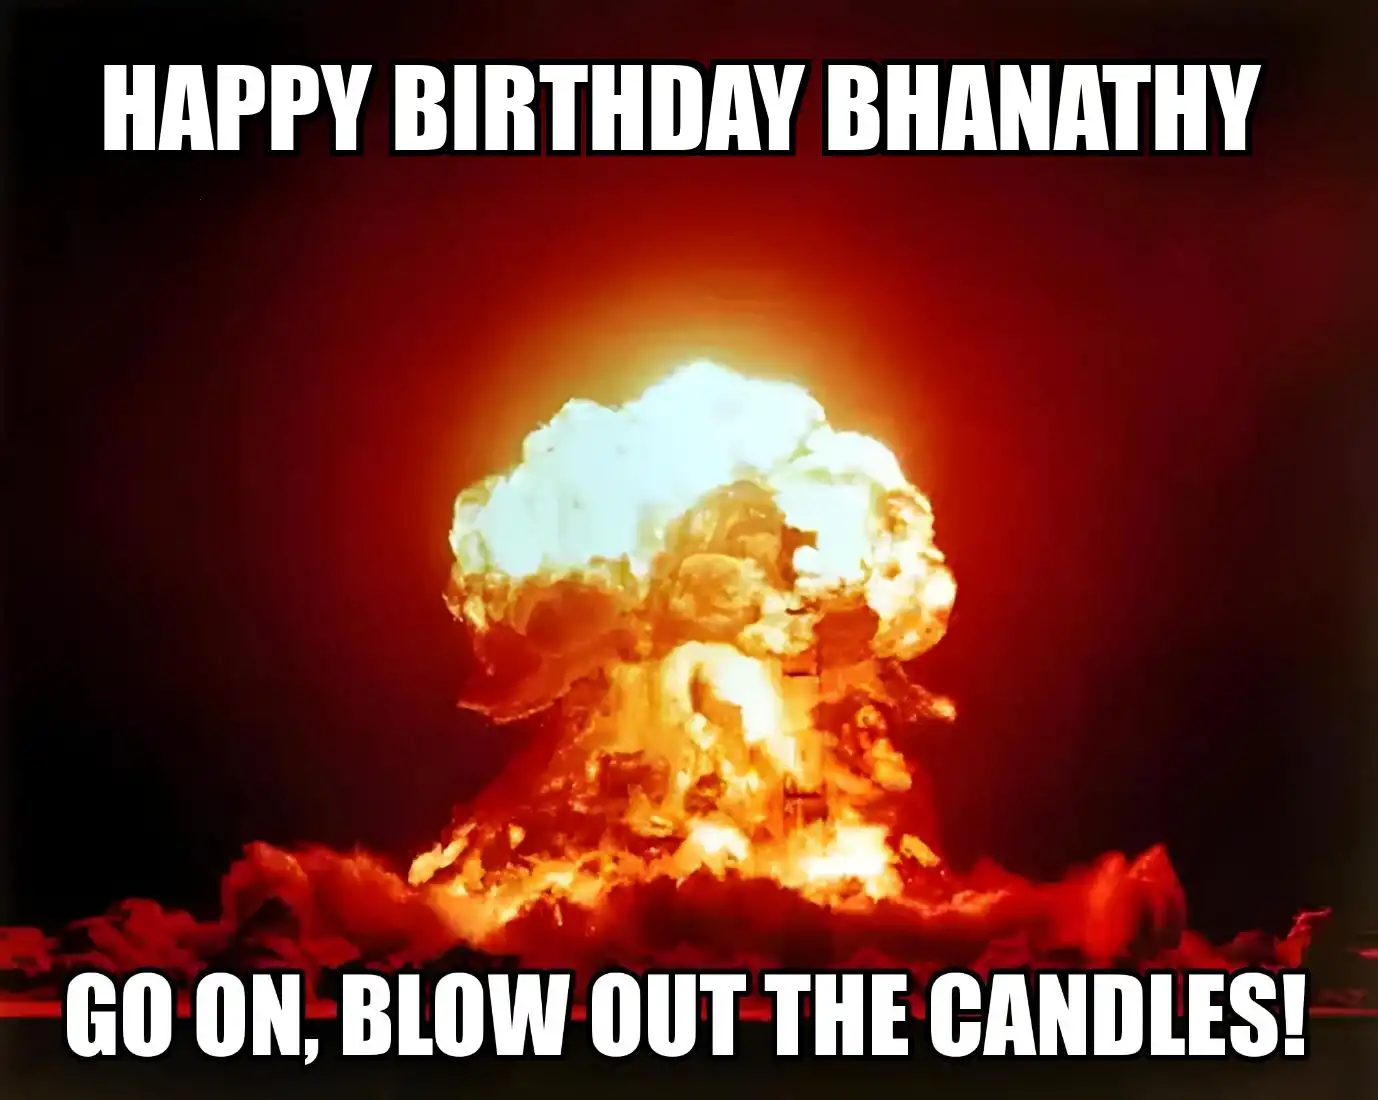 Happy Birthday Bhanathy Go On Blow Out The Candles Meme